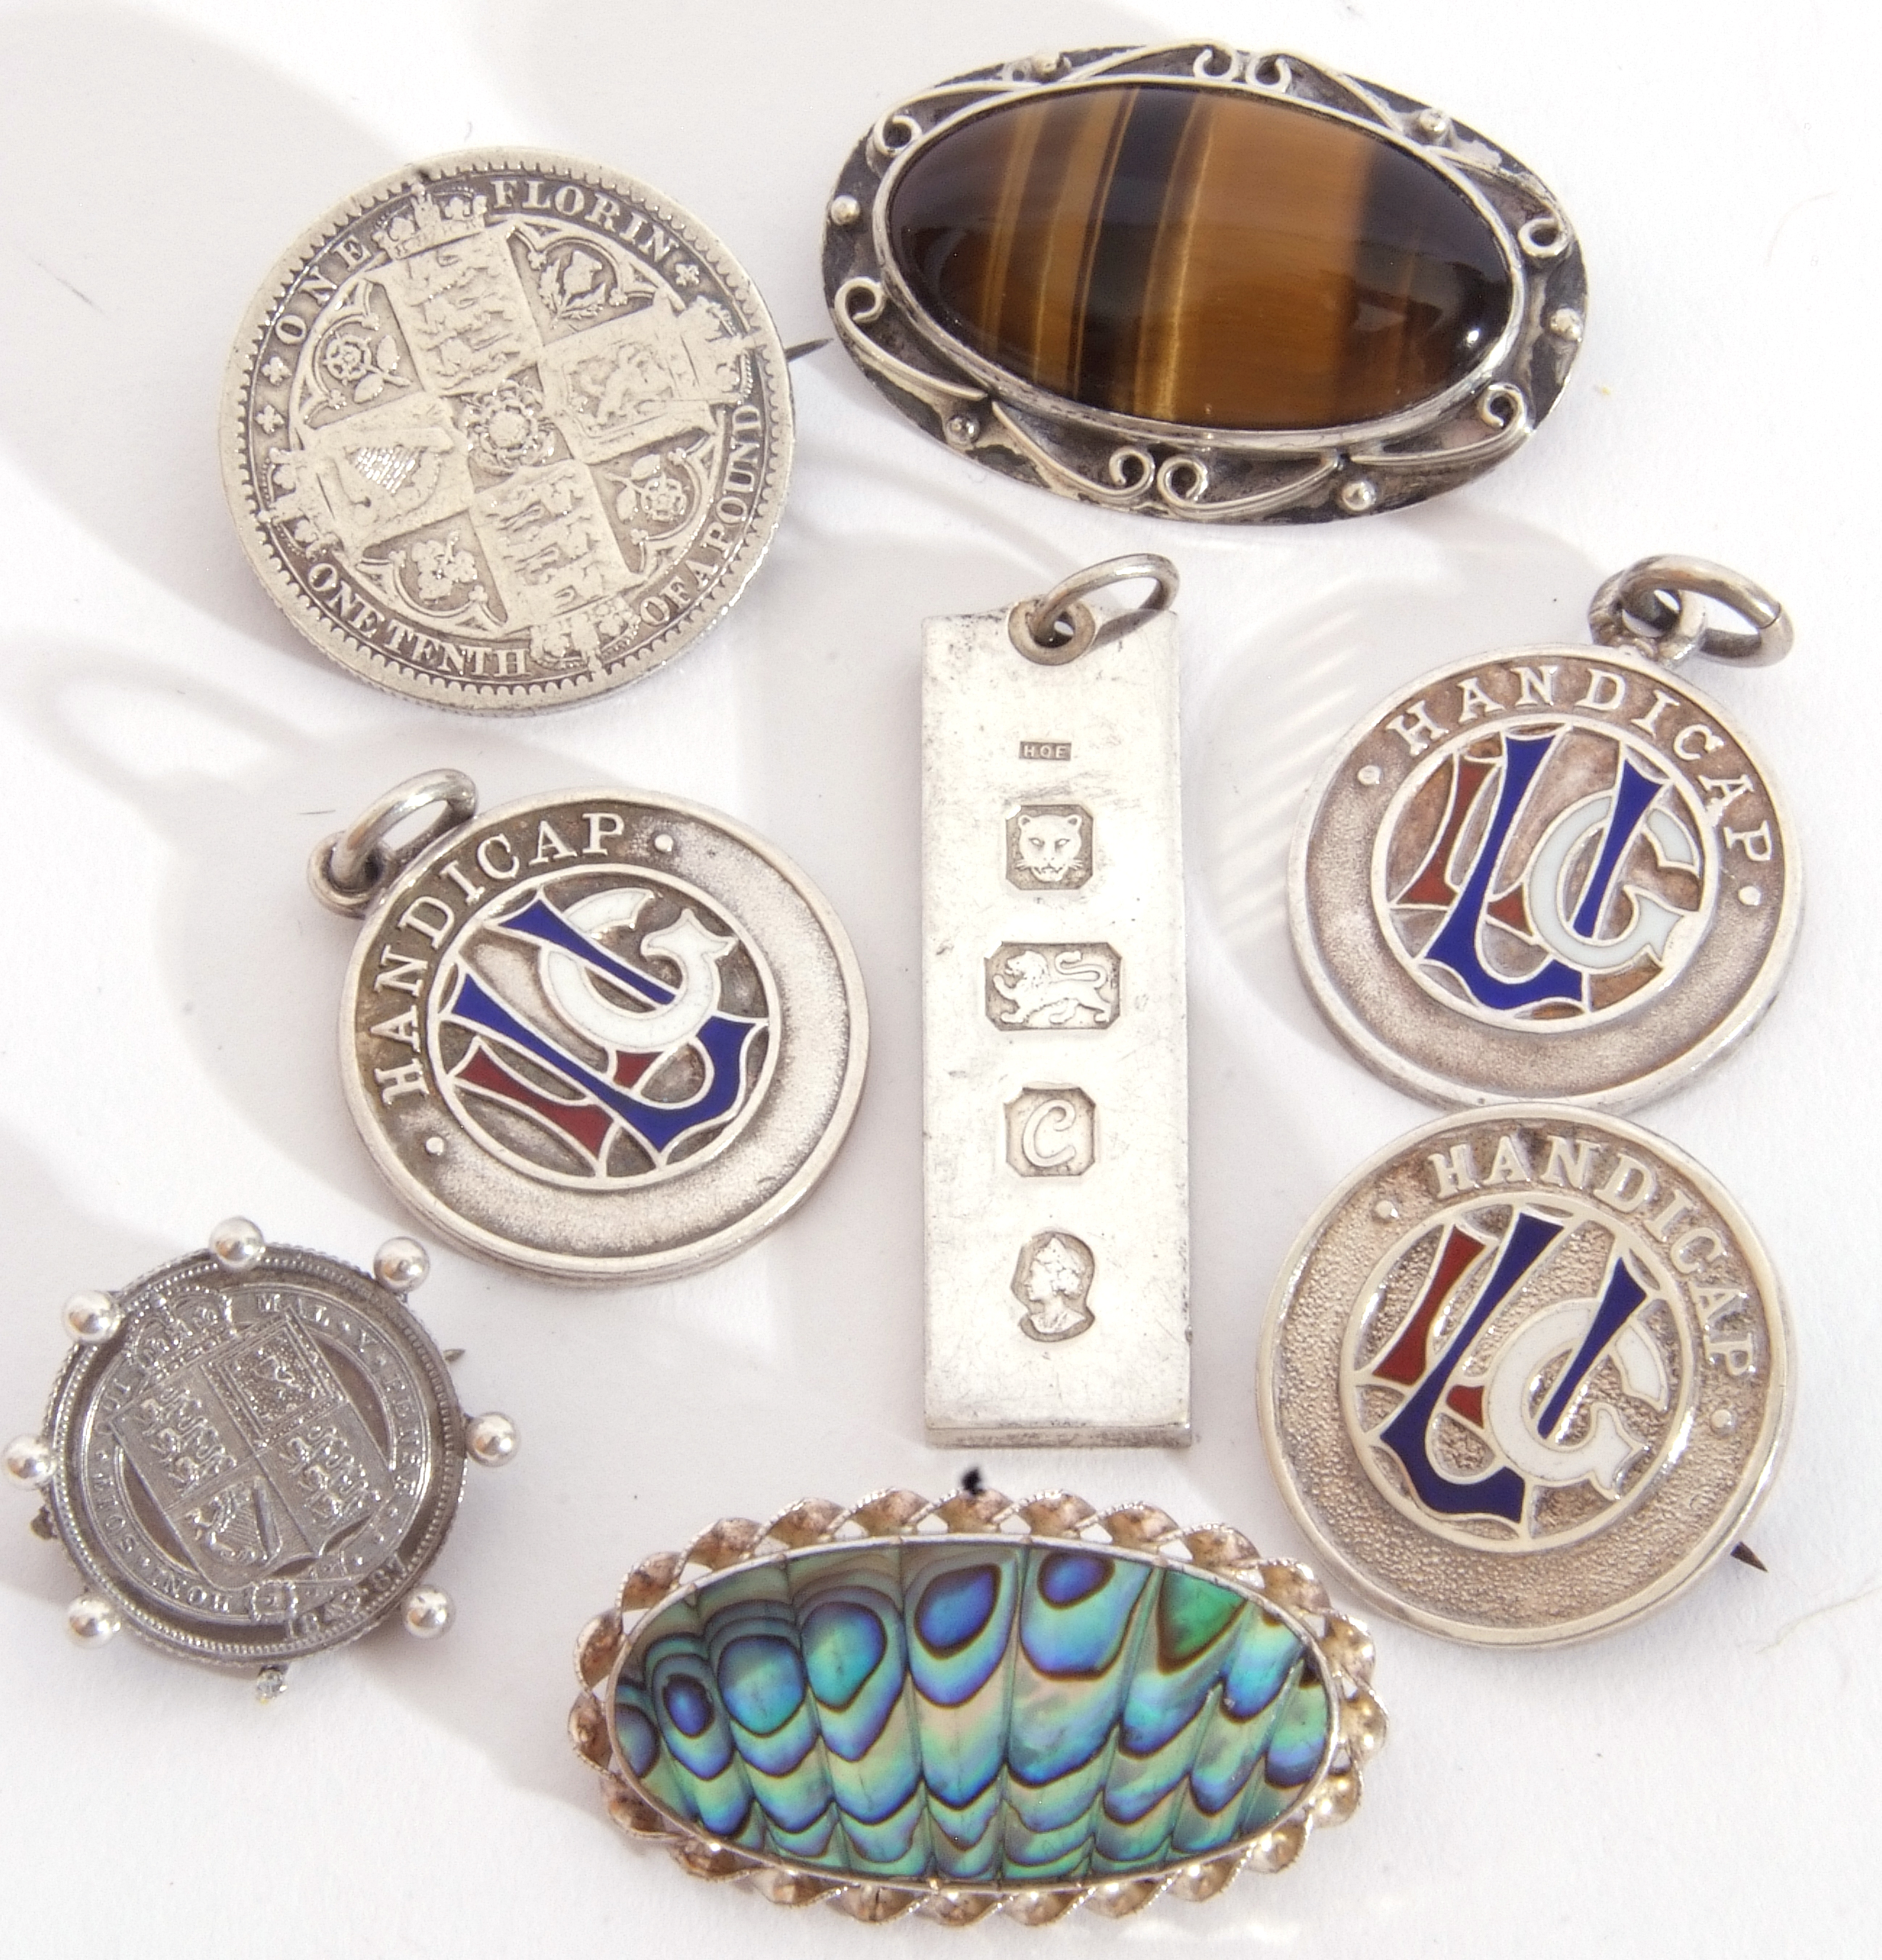 Mixed Lot: two silver and enamelled hallmarked pendants, a matching badge, maker"s mark for Mappin & - Image 2 of 3